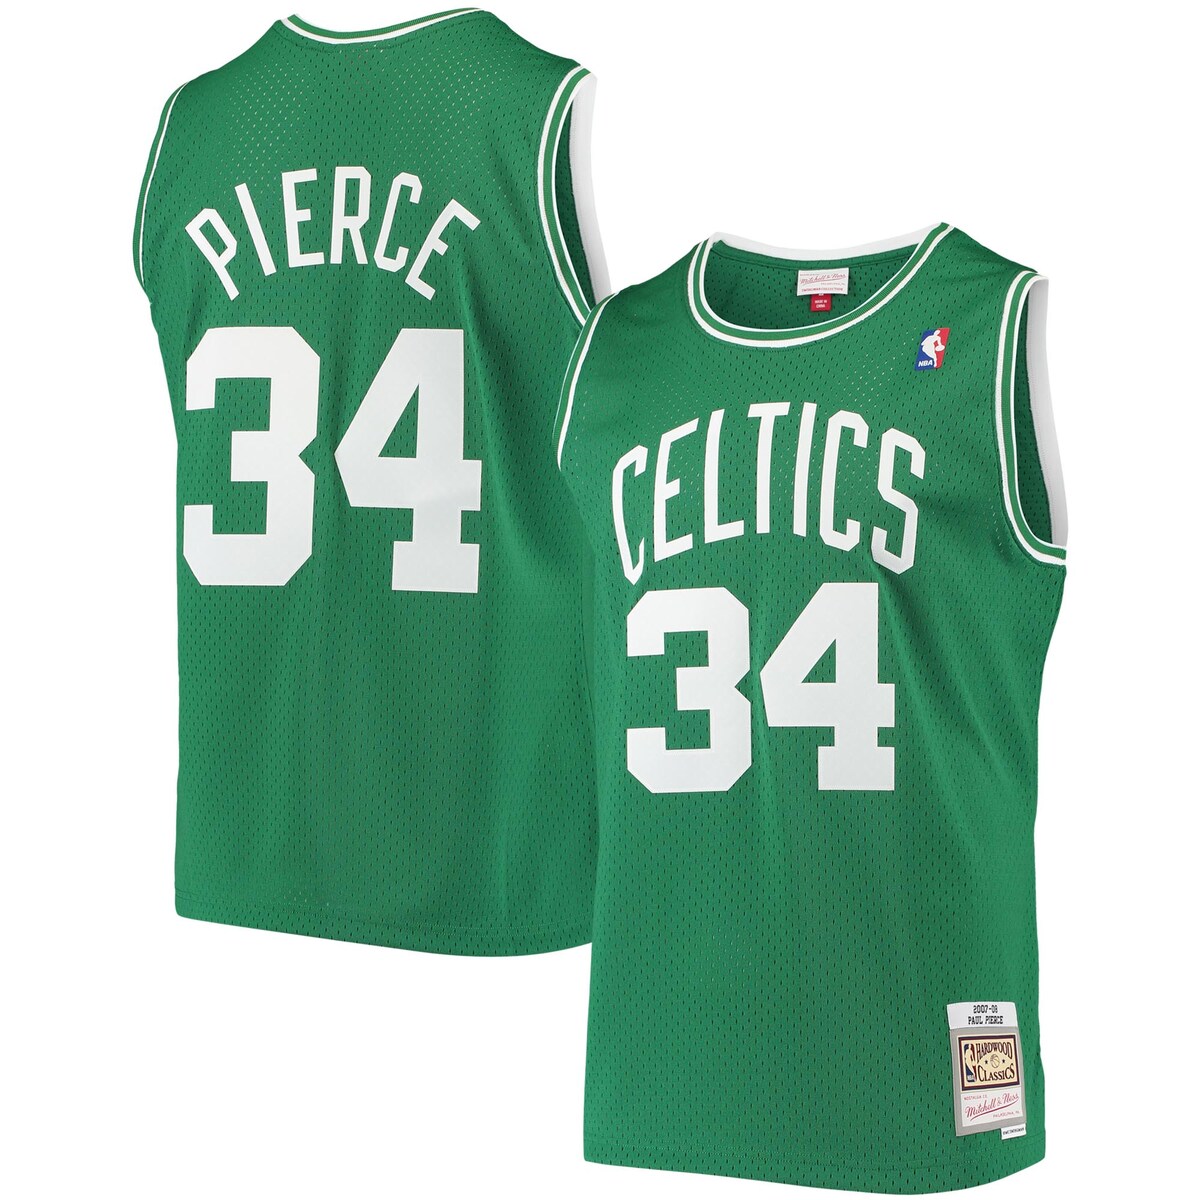 Sport a little throwback spirit in this Boston Celtics Paul Pierce Hardwood Classics Swingman jersey from Mitchell & Ness.Brand: Mitchell & NessOfficially licensedImportedTackle twill graphicsSewn-on stripesSizing Tip: Product runs small. We recommend ordering one size larger than you normally wear.Machine wash, line dryApplique jock tagMaterial: 100% PolyesterSide split hemEmbroidered NBA logo